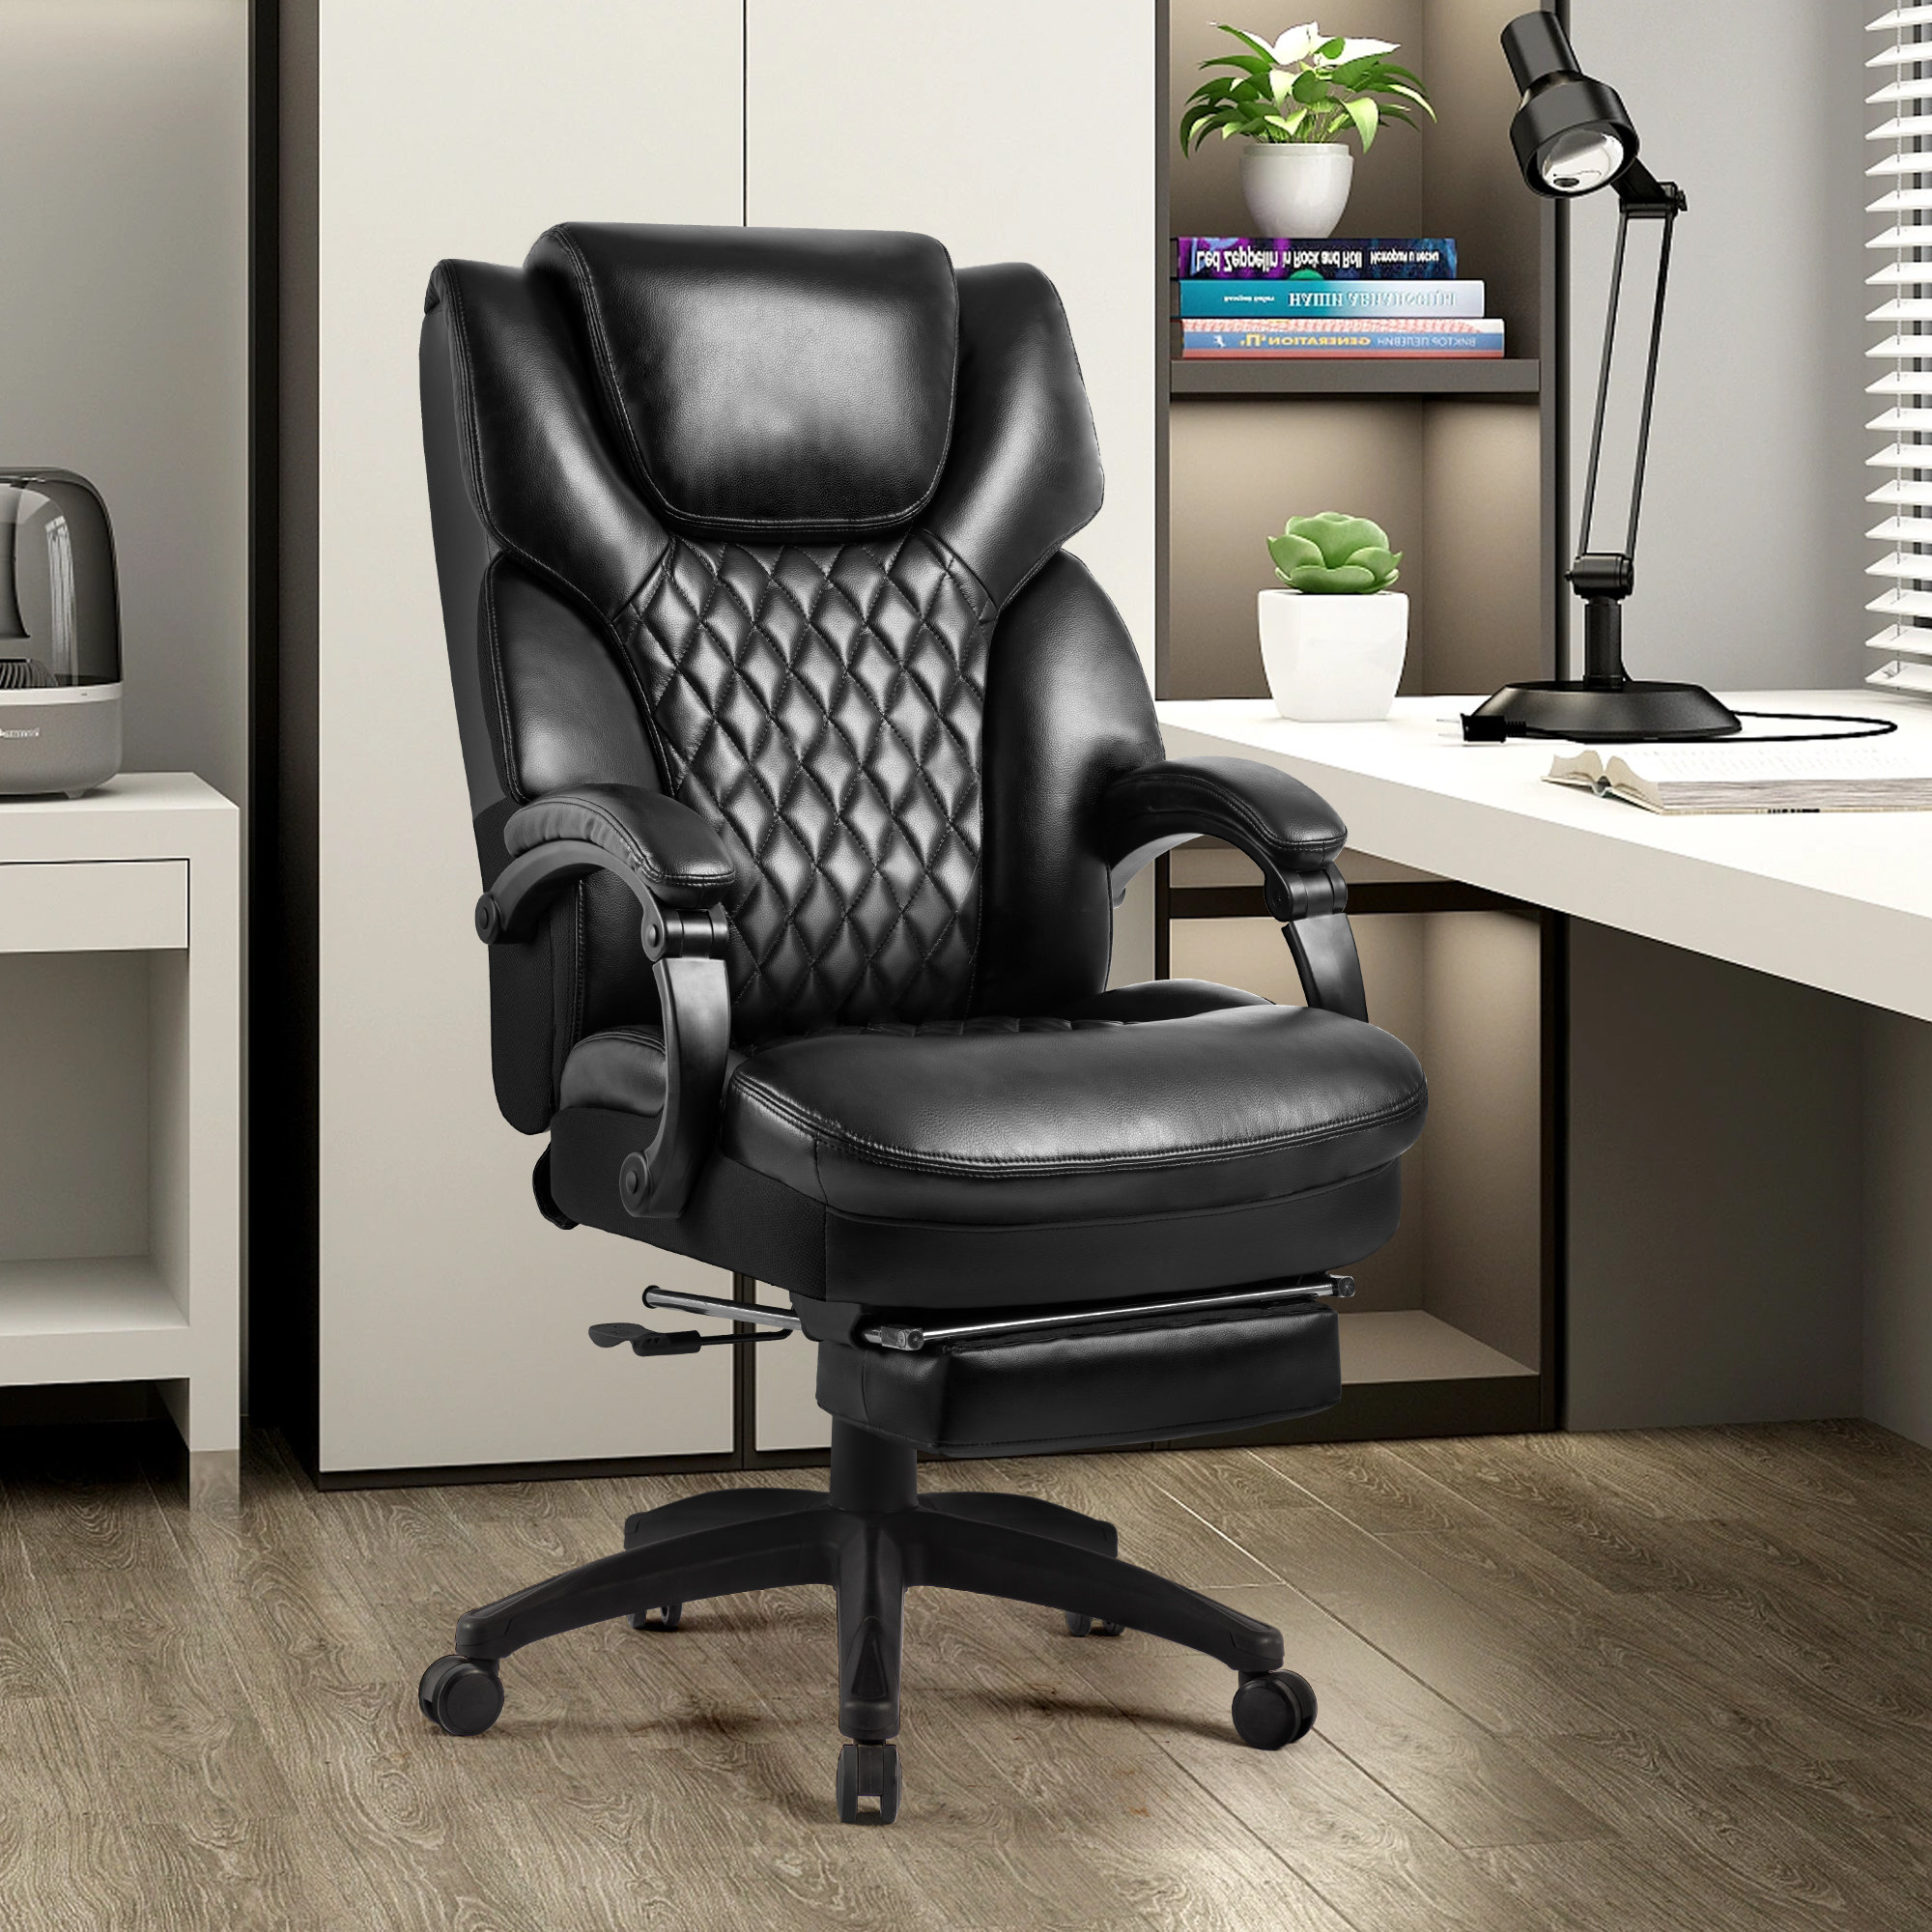 Big and Tall Office Chair 500LBS for Heavy People High Back Executive  Office Chair Comfortable Thickening Padded Cushion Leather Chair All Day  Comfort